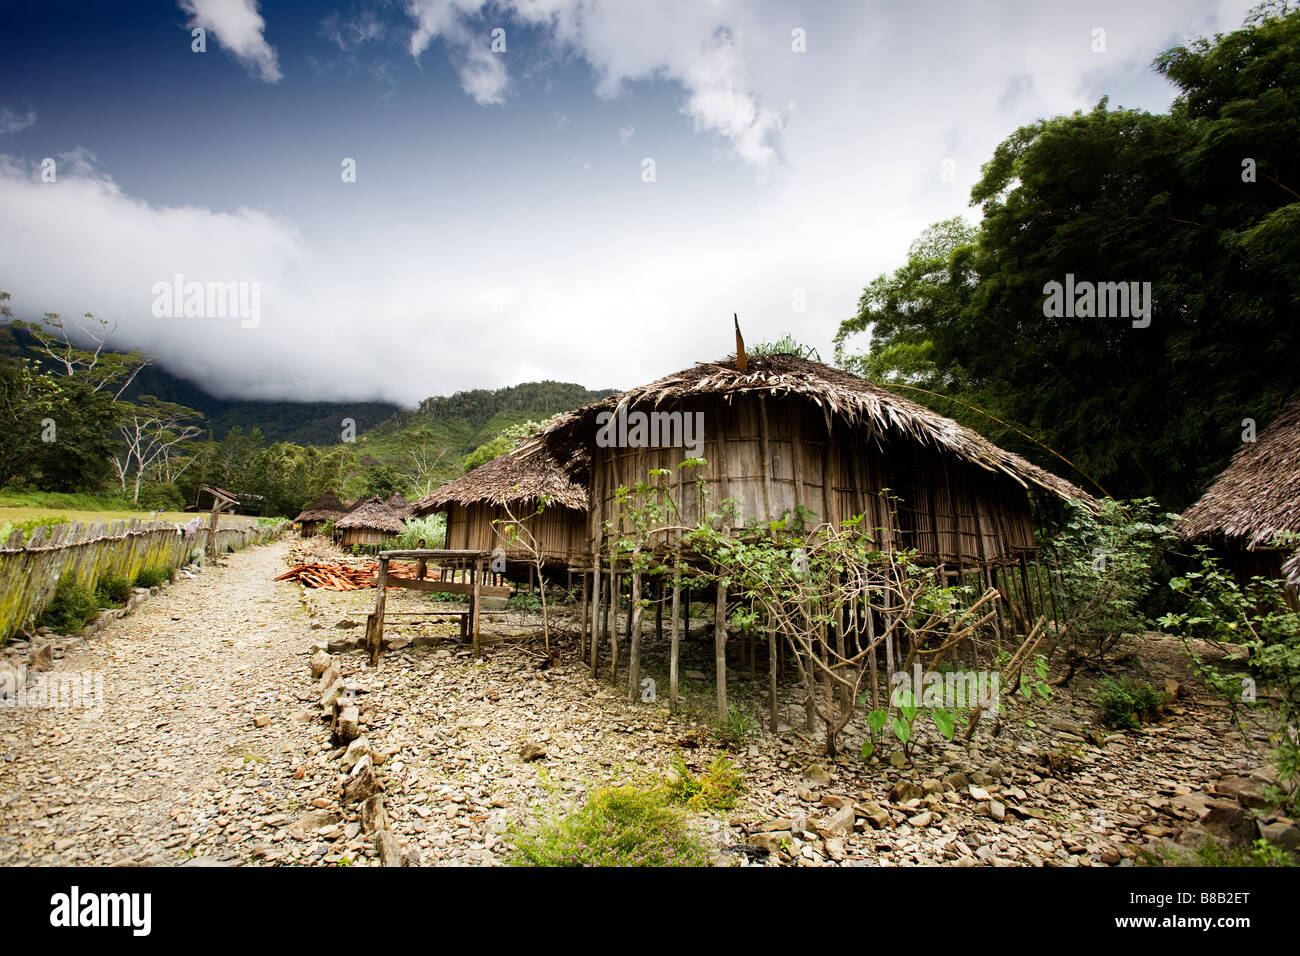 A traditional village hut in Papua Indonesia Stock Photo